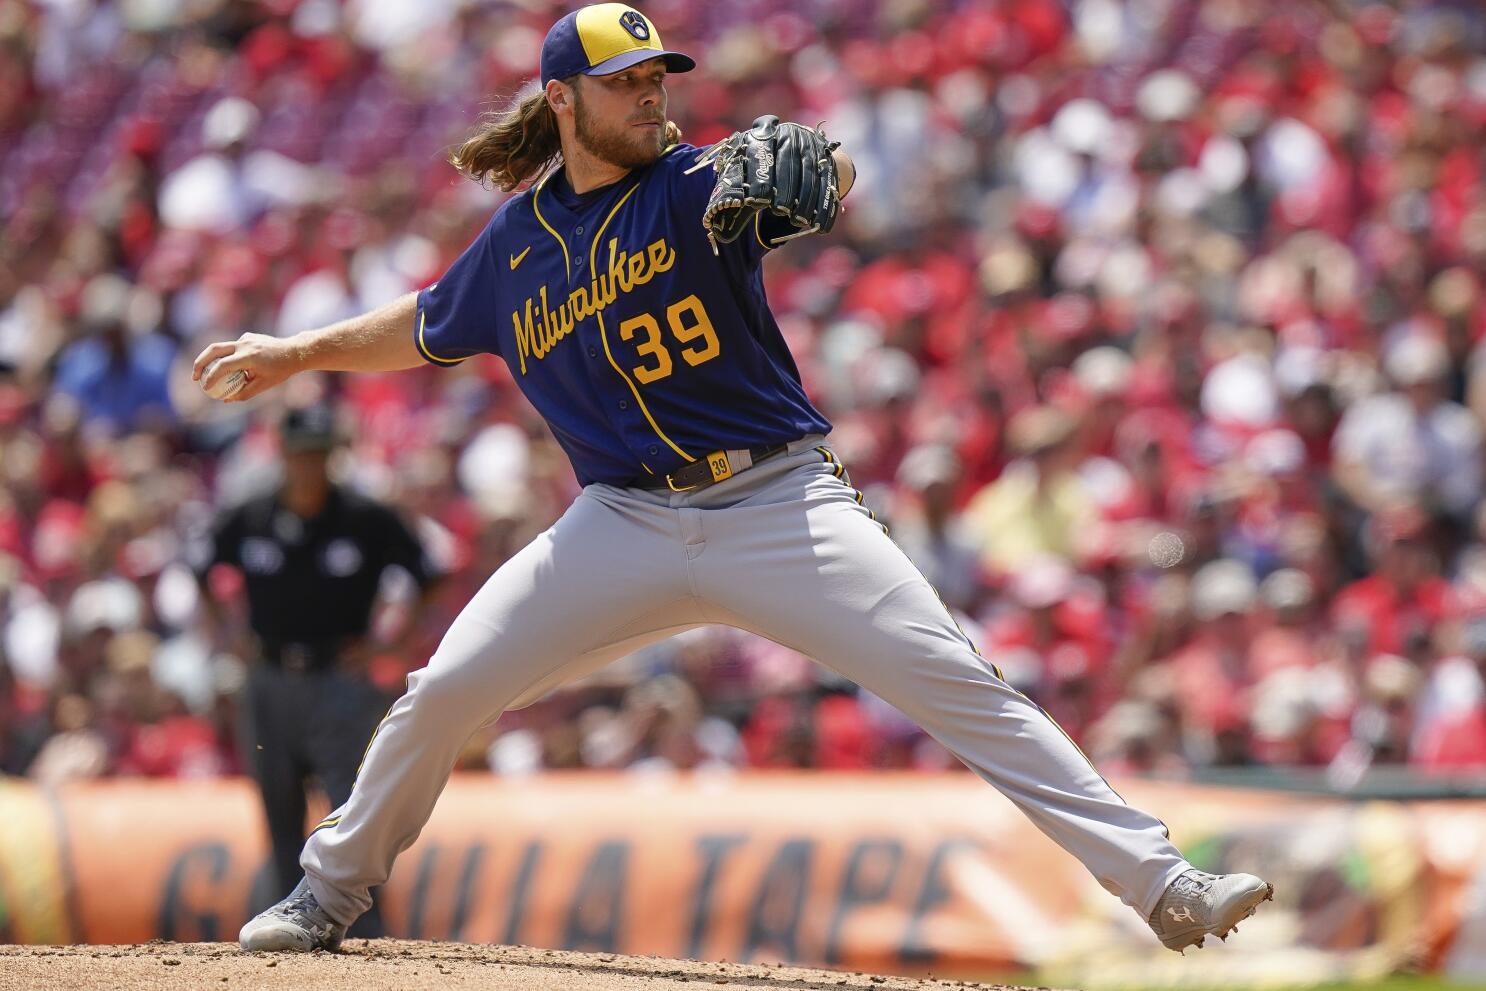 Cutter in Hand, Corbin Burnes Is the Hottest Pitcher on the Planet